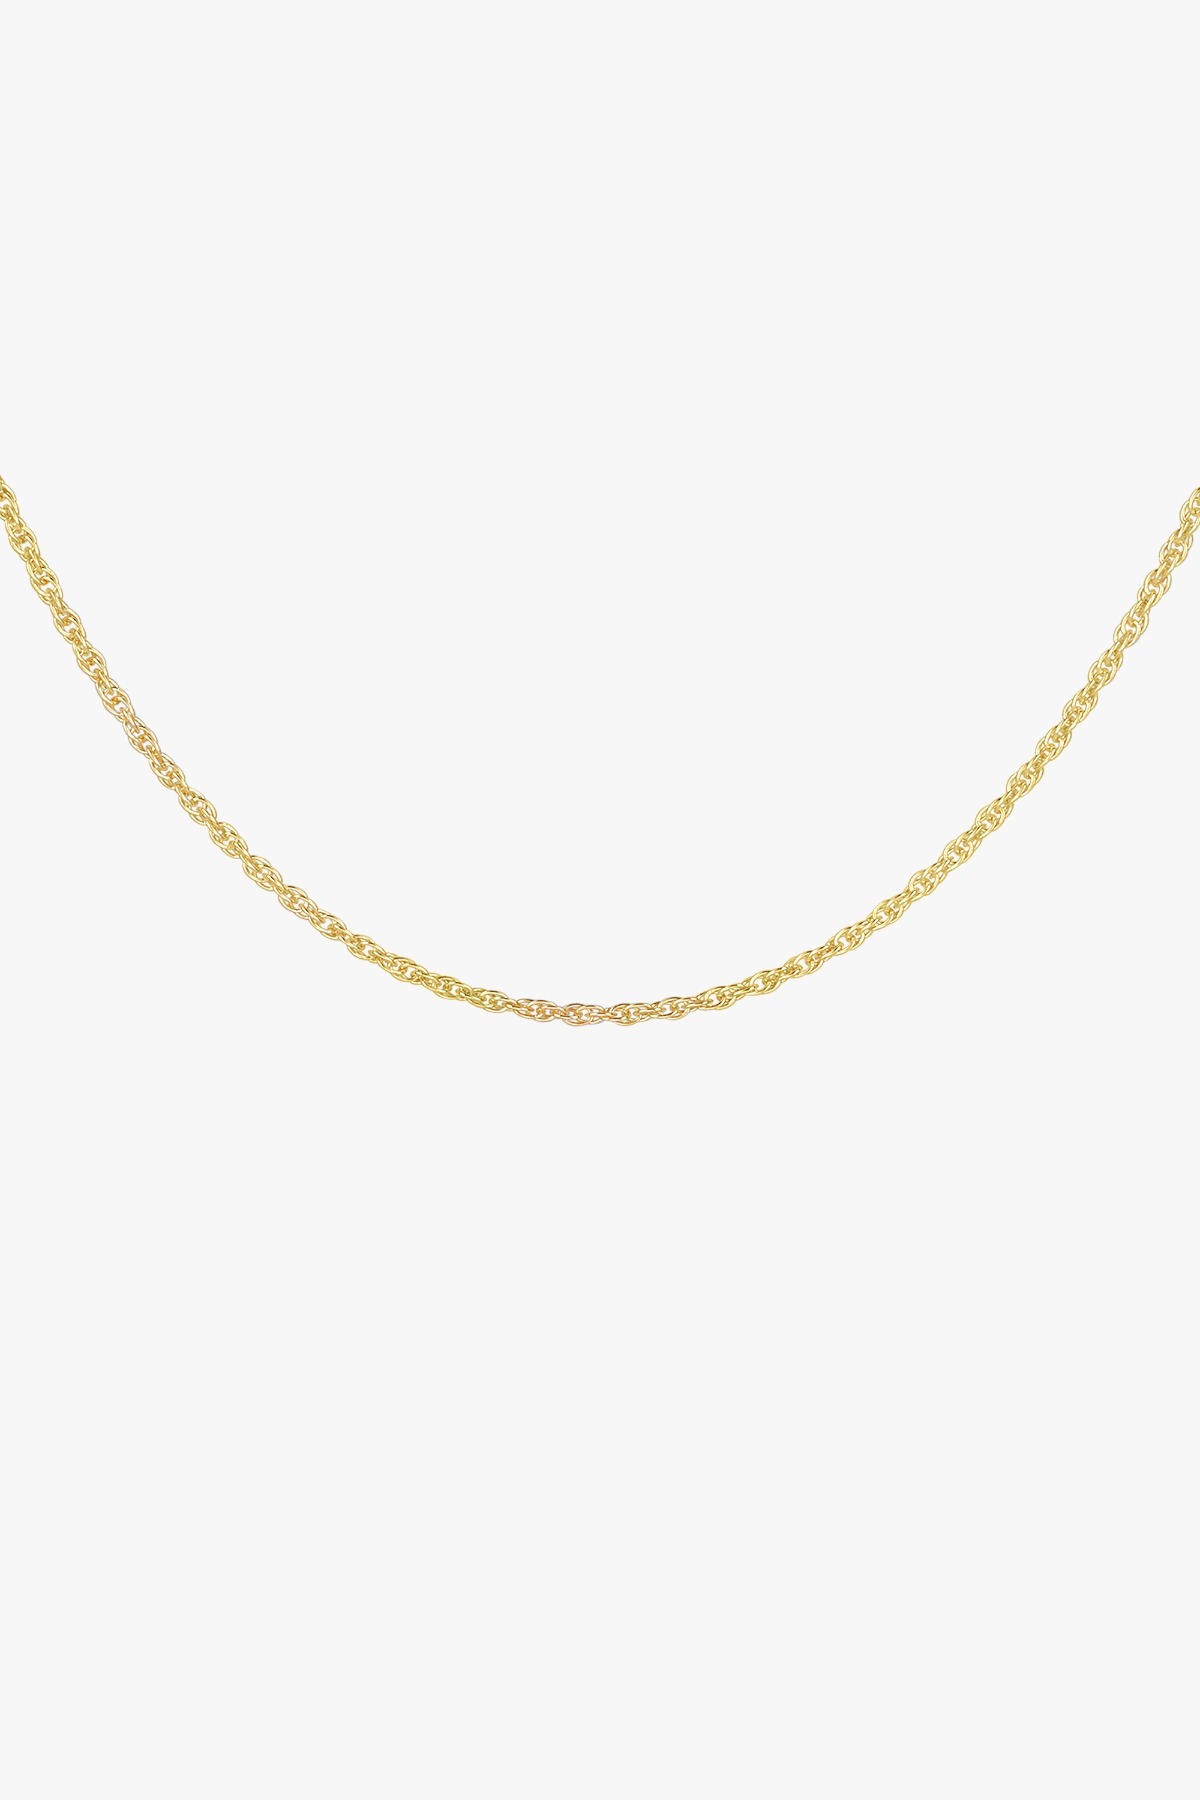 wildthings collectables - Rope chain necklace gold 45cm 5